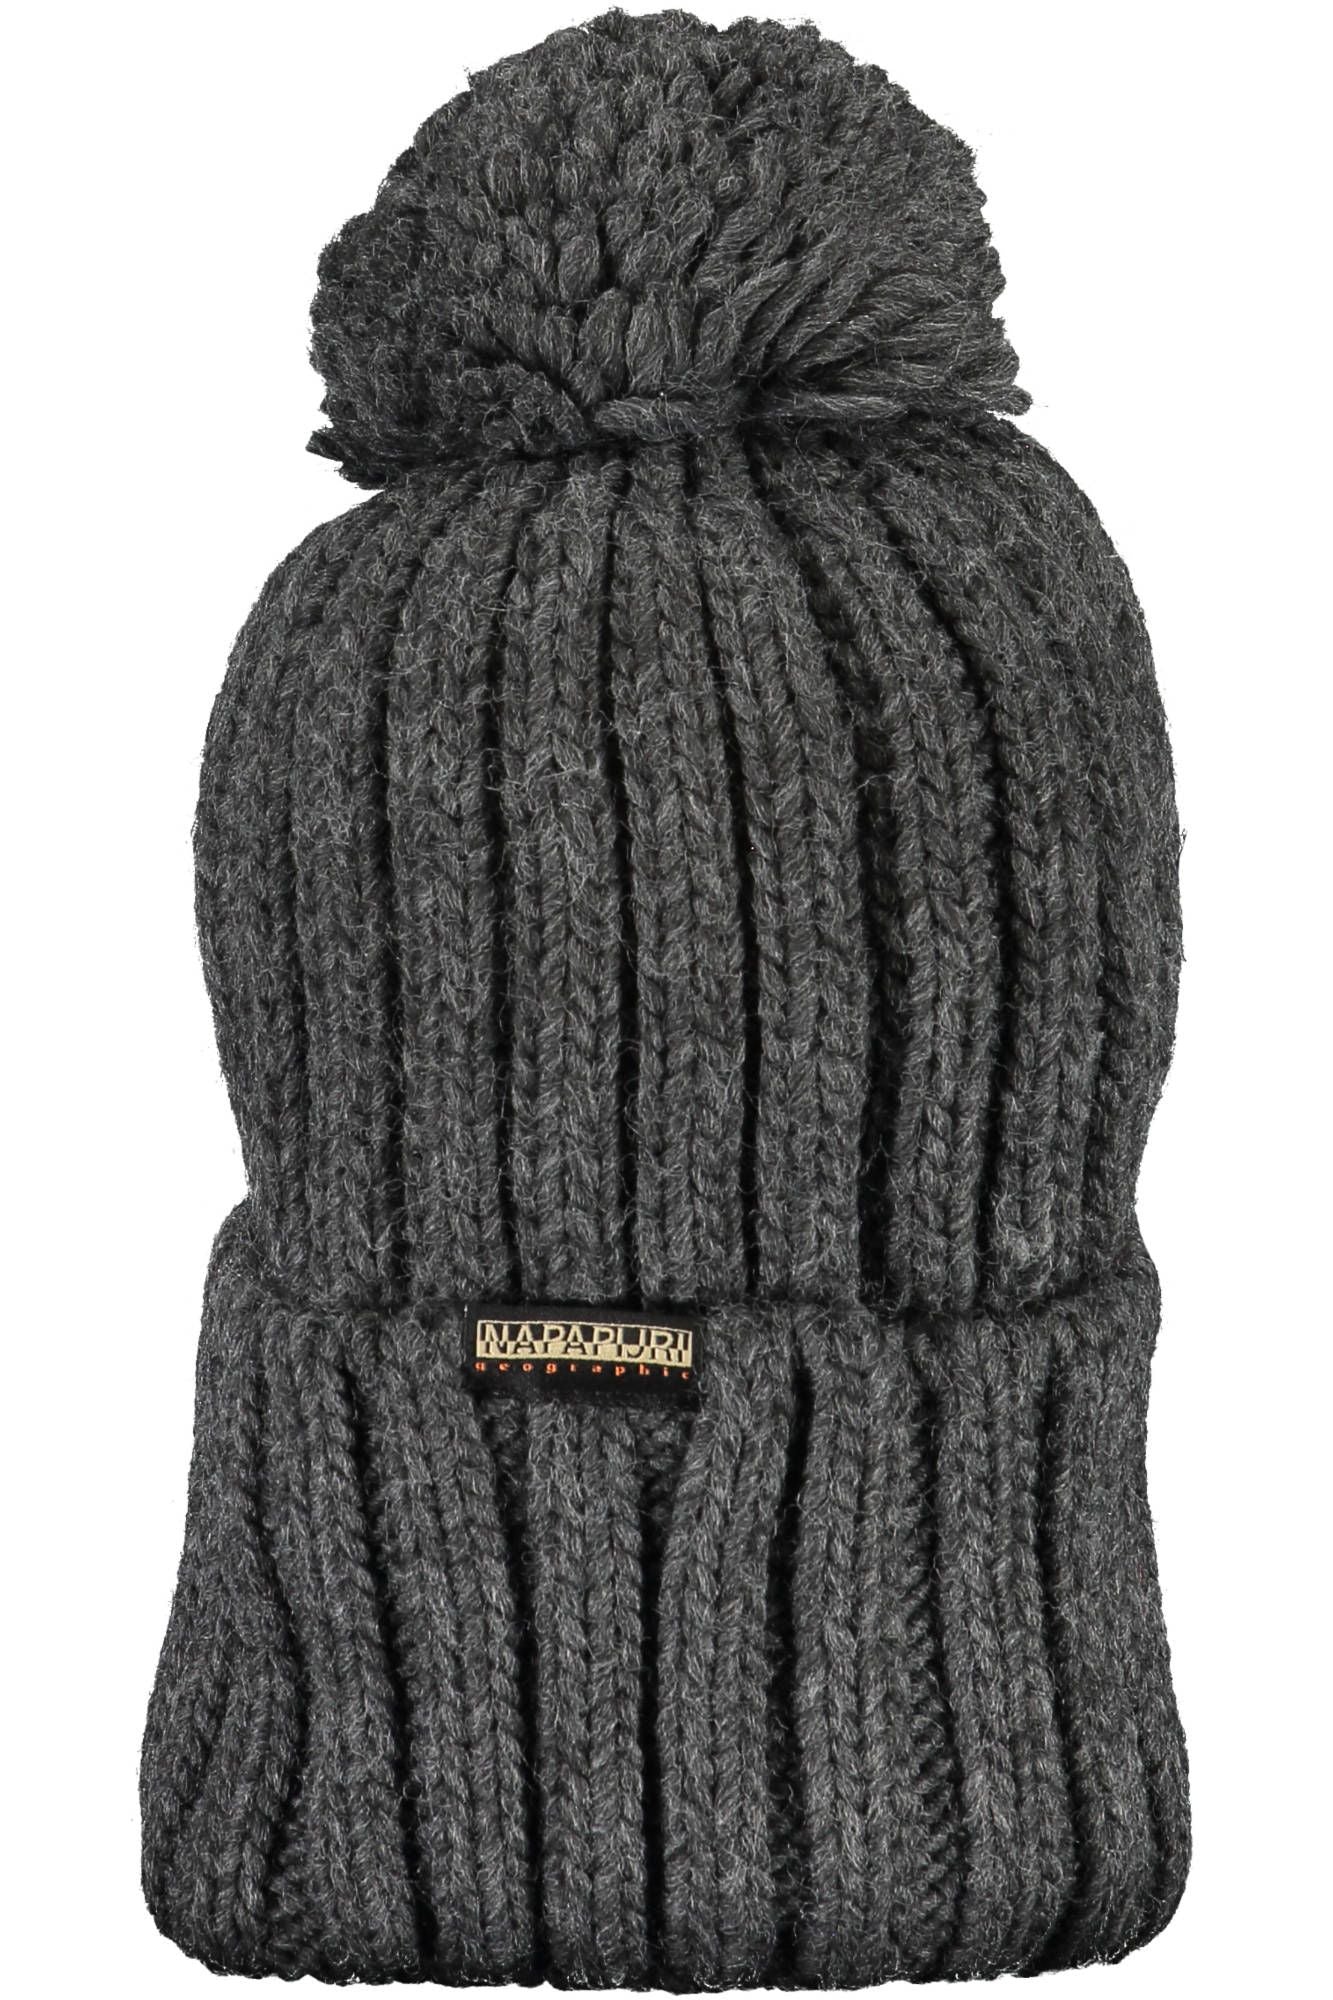 Chic Gray Pompon Hat with Signature Embroidery - Divitiae Glamour